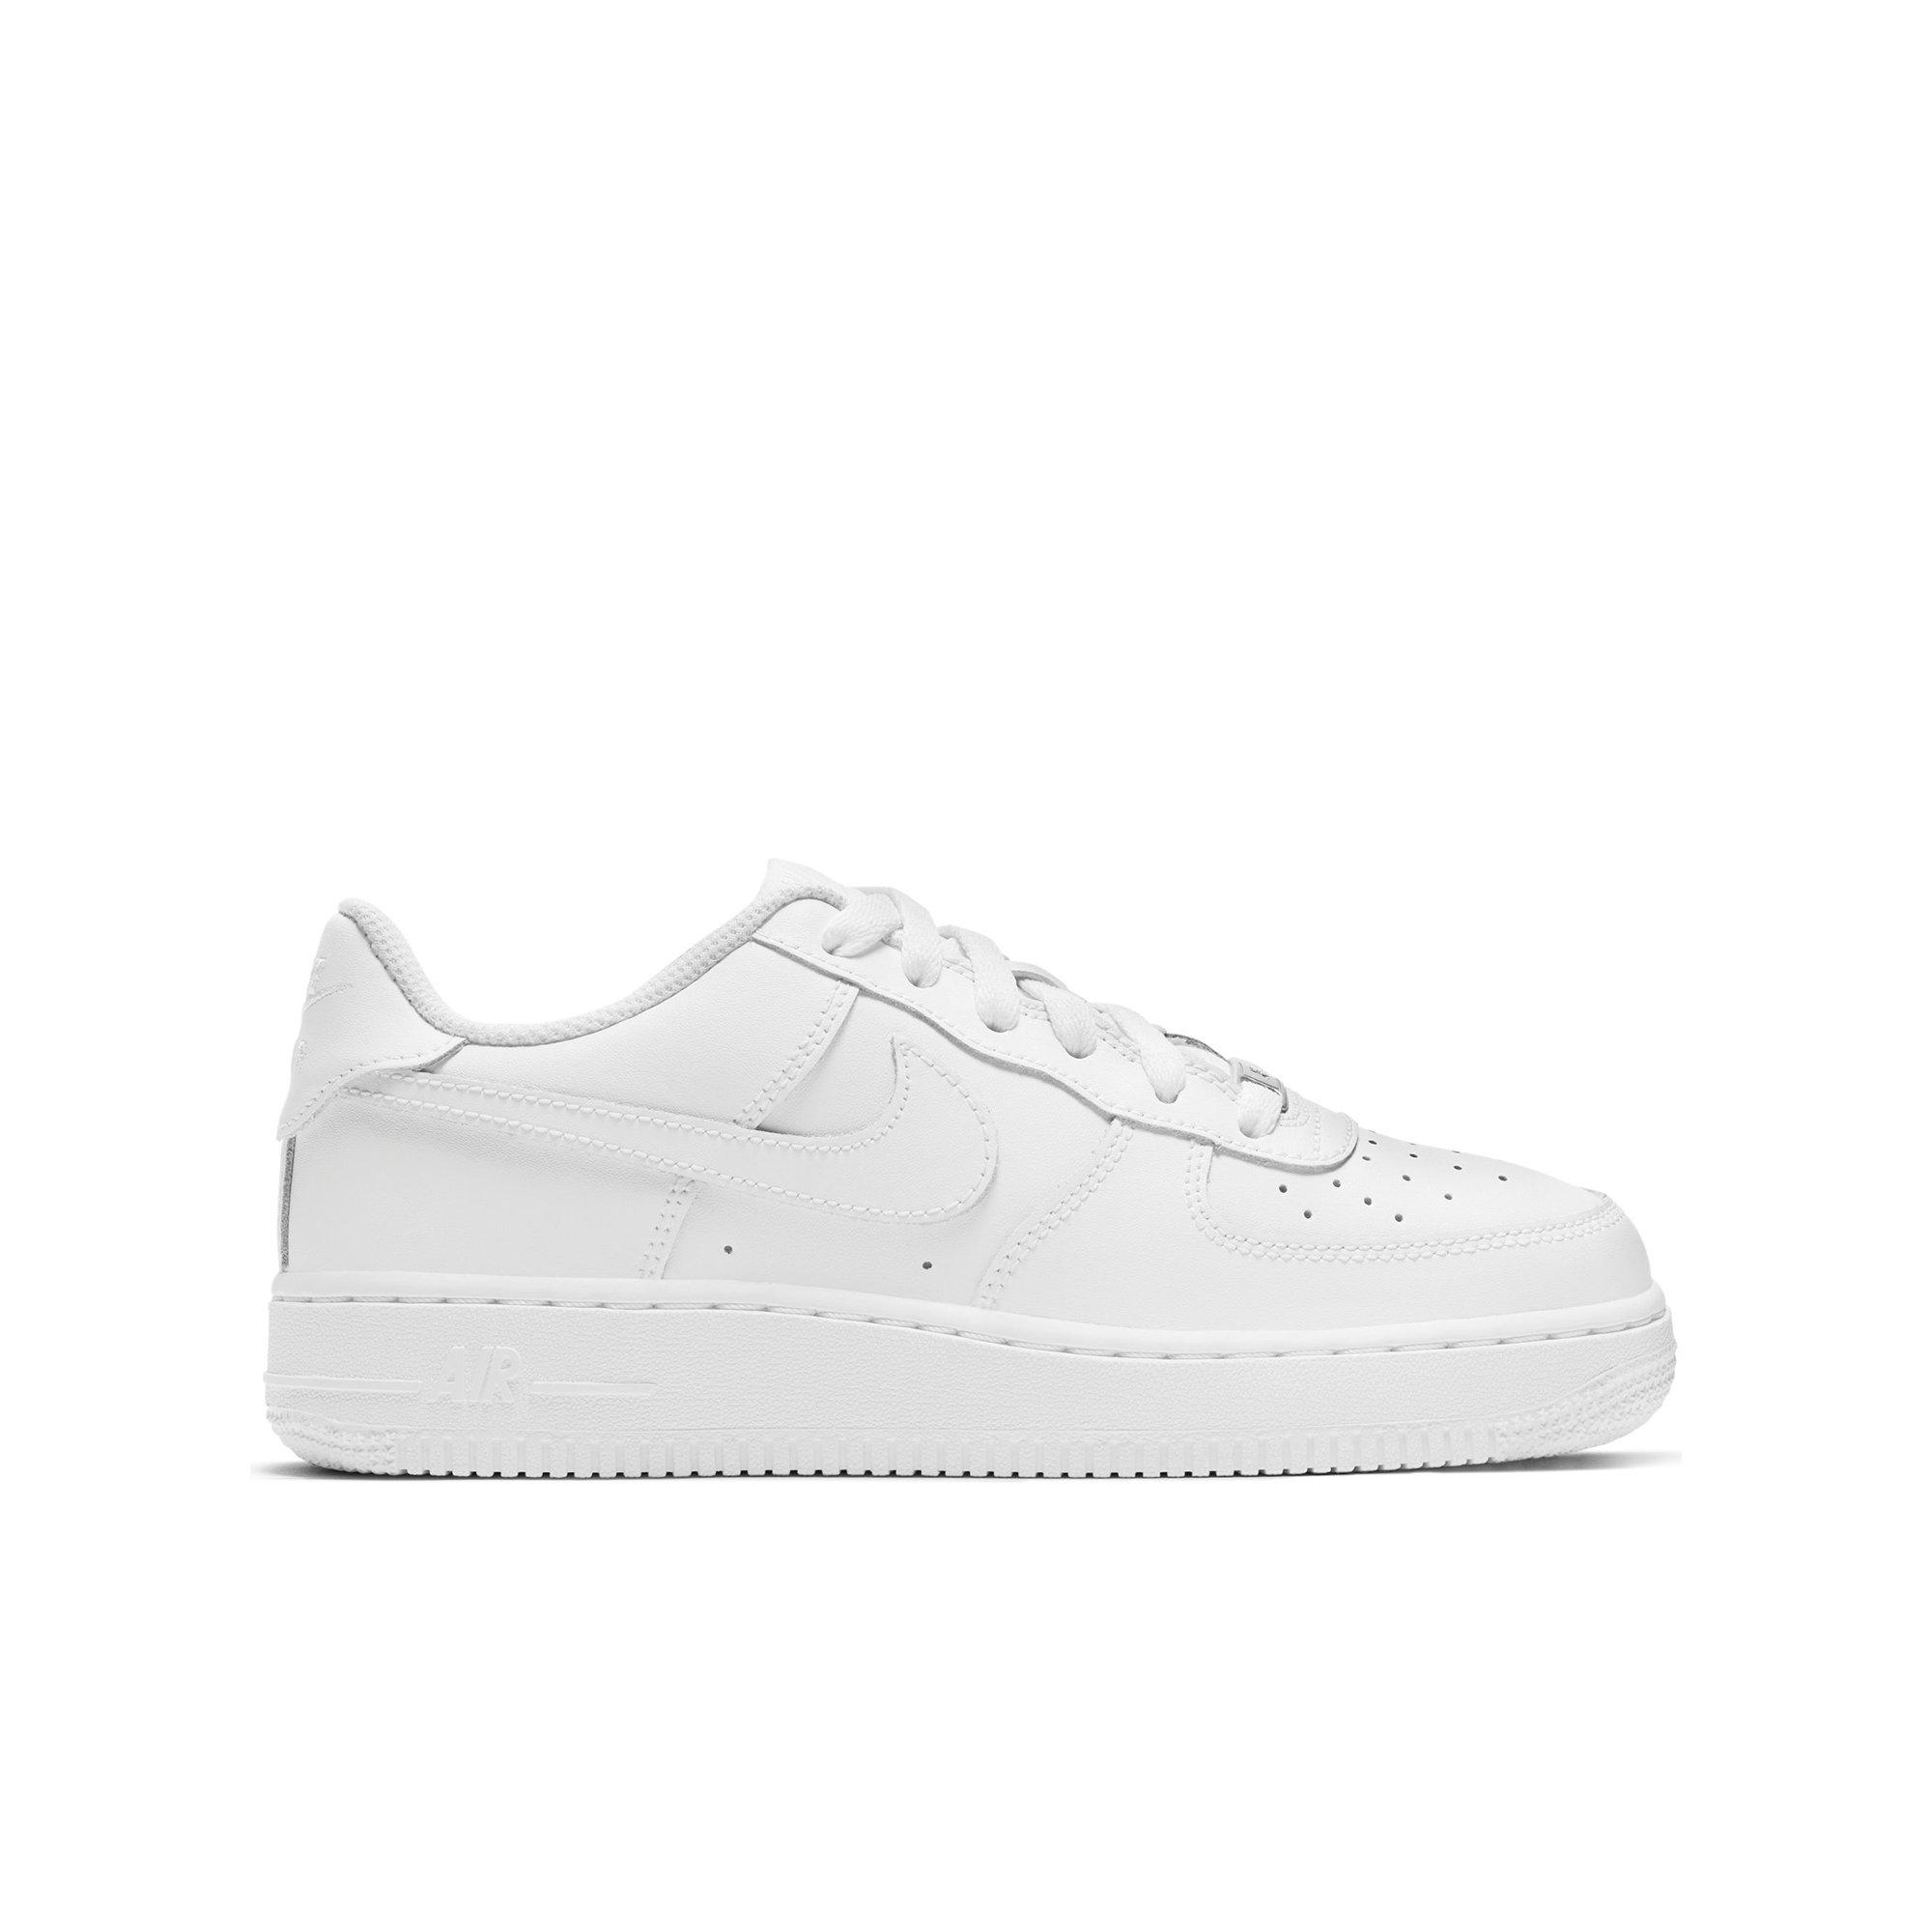 white nike air forces grade school